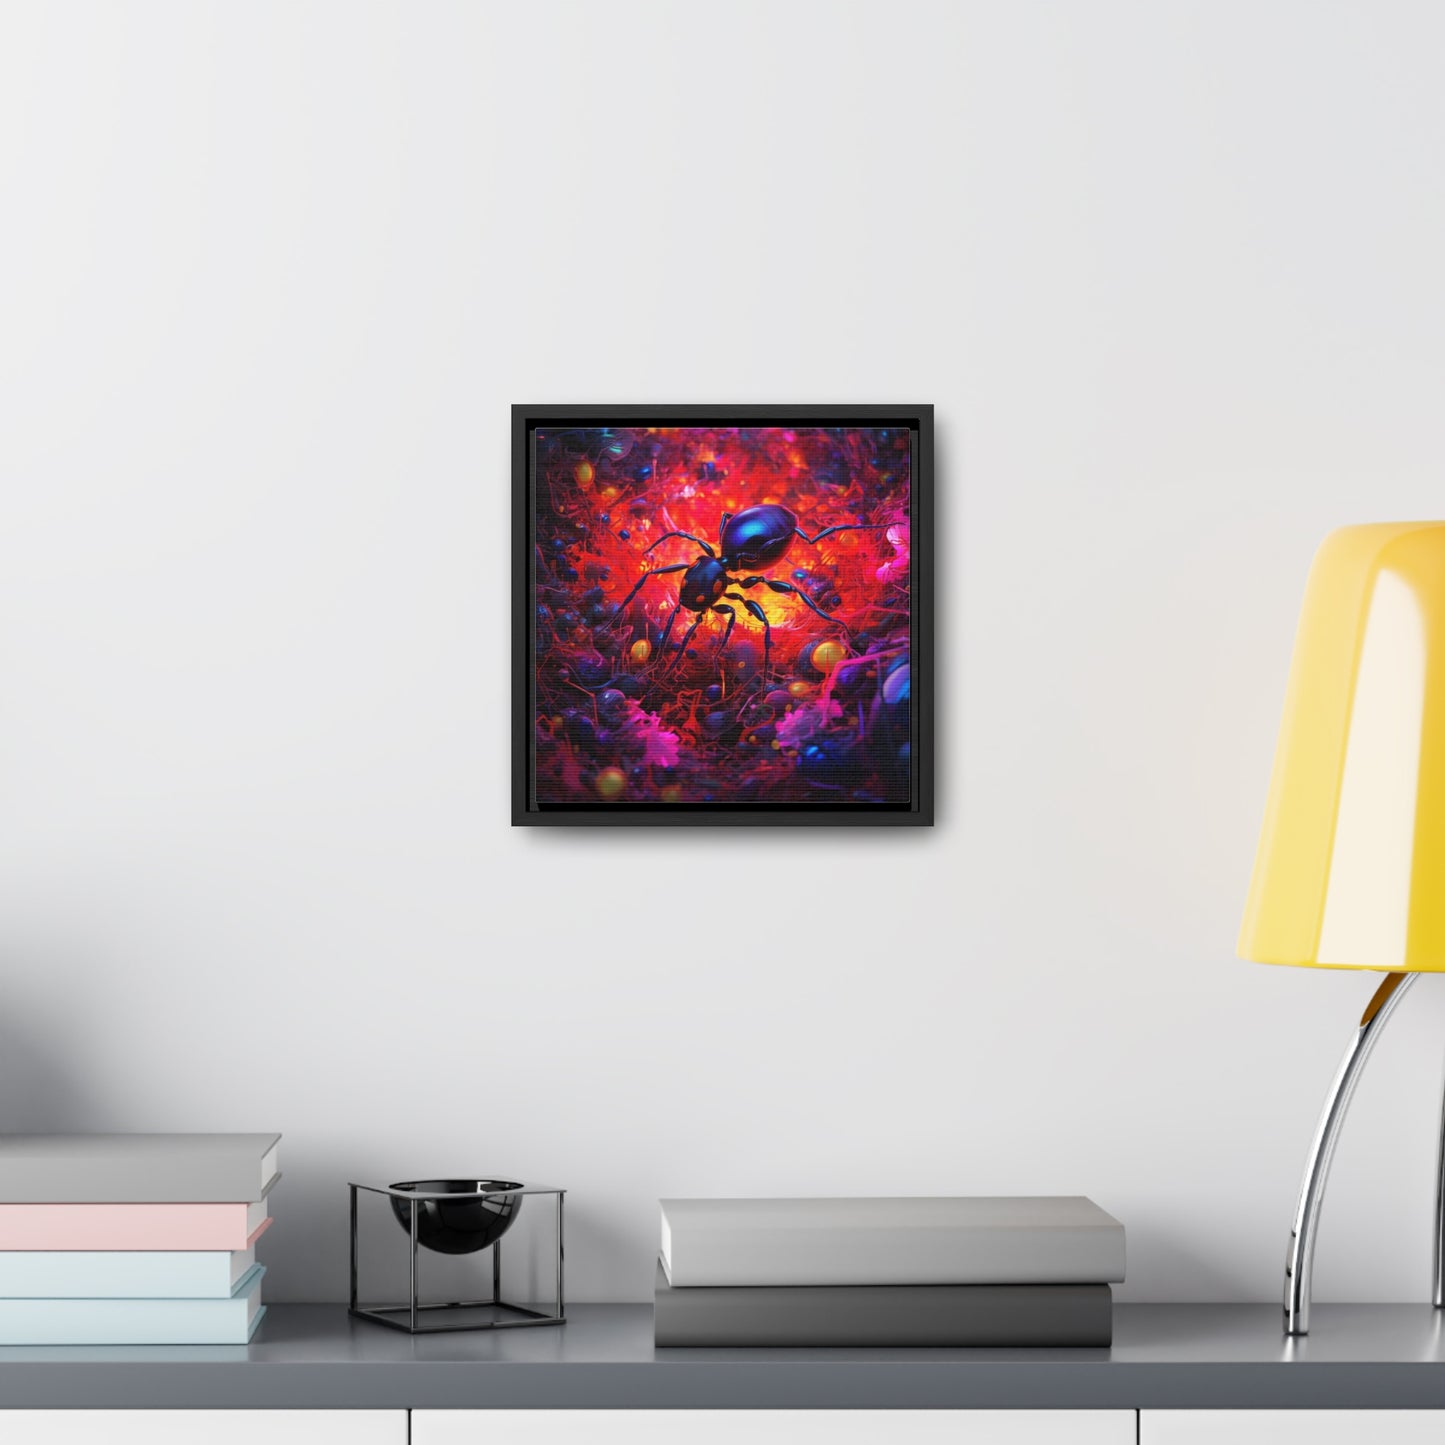 Gallery Canvas Wraps, Square Frame Ants Home 1